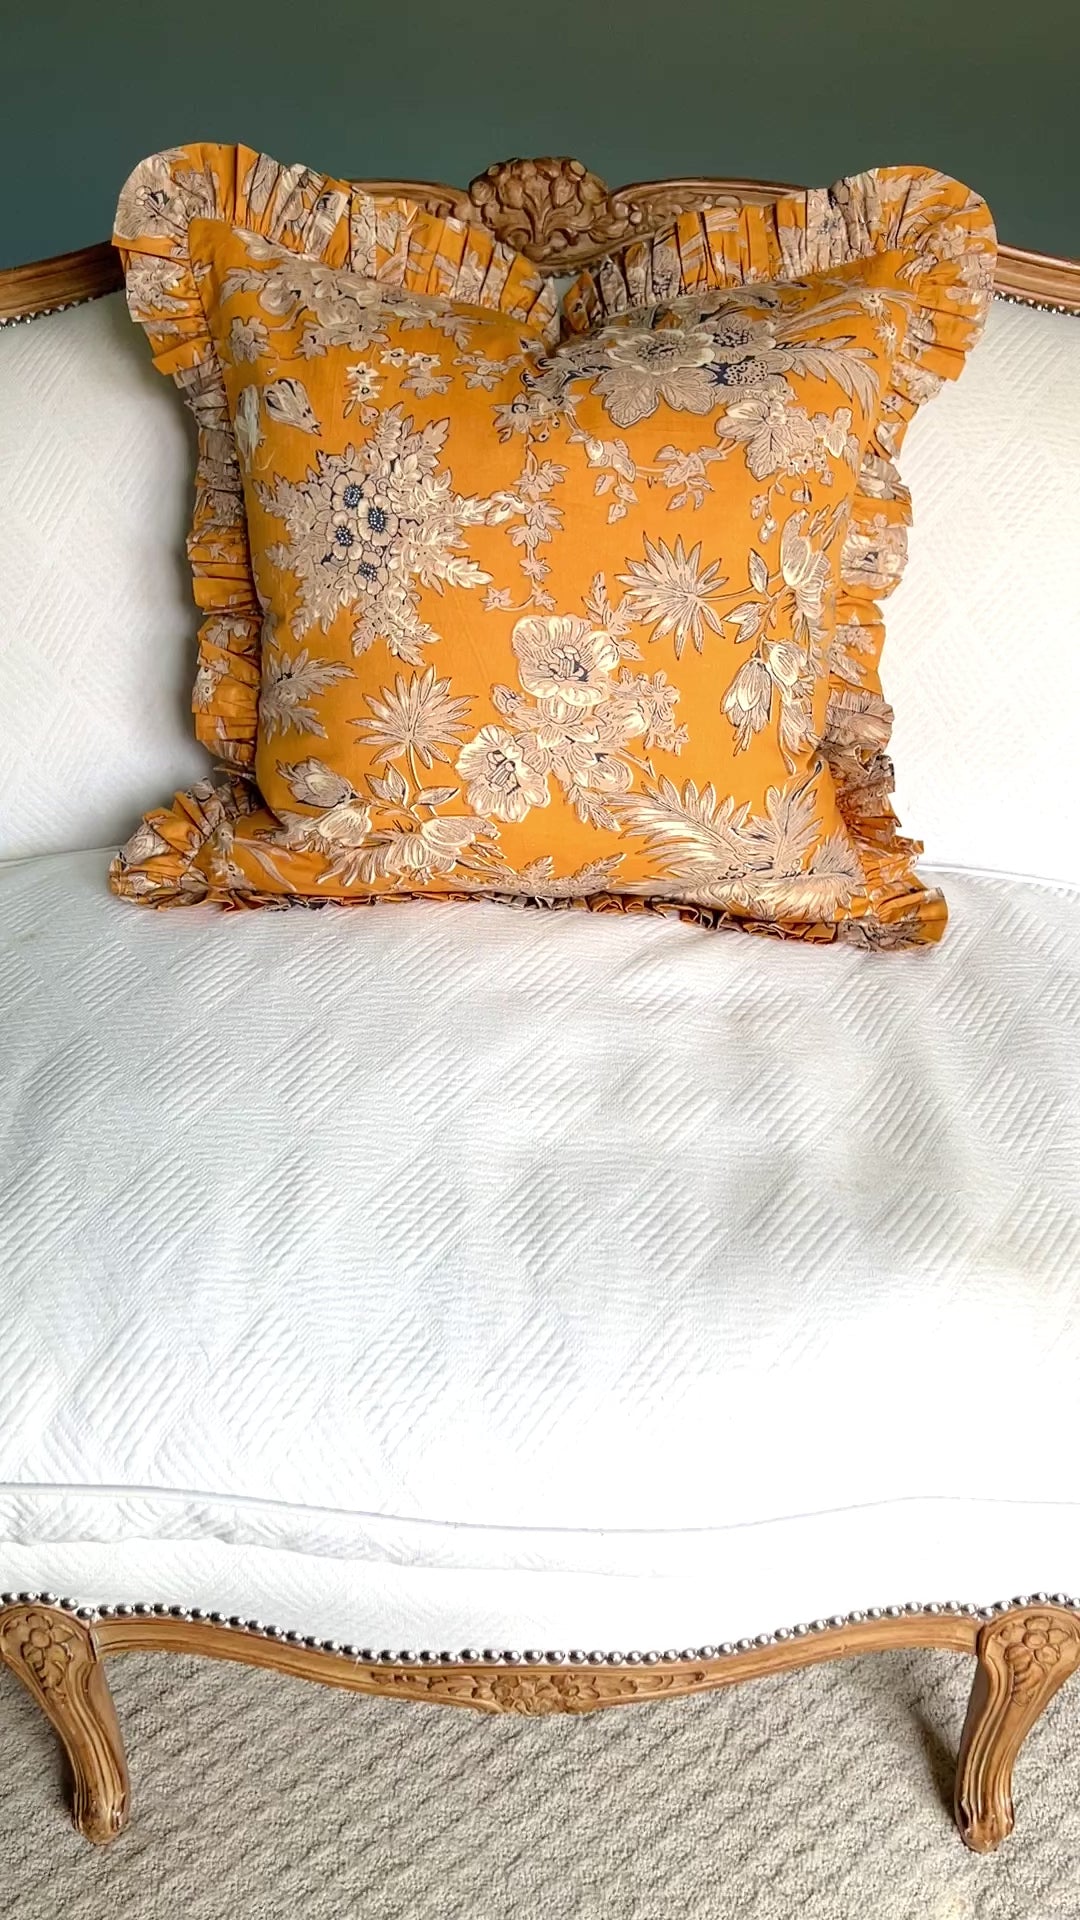 Mustard yellow floral toile pillow cover with ruffle trim PREORDER